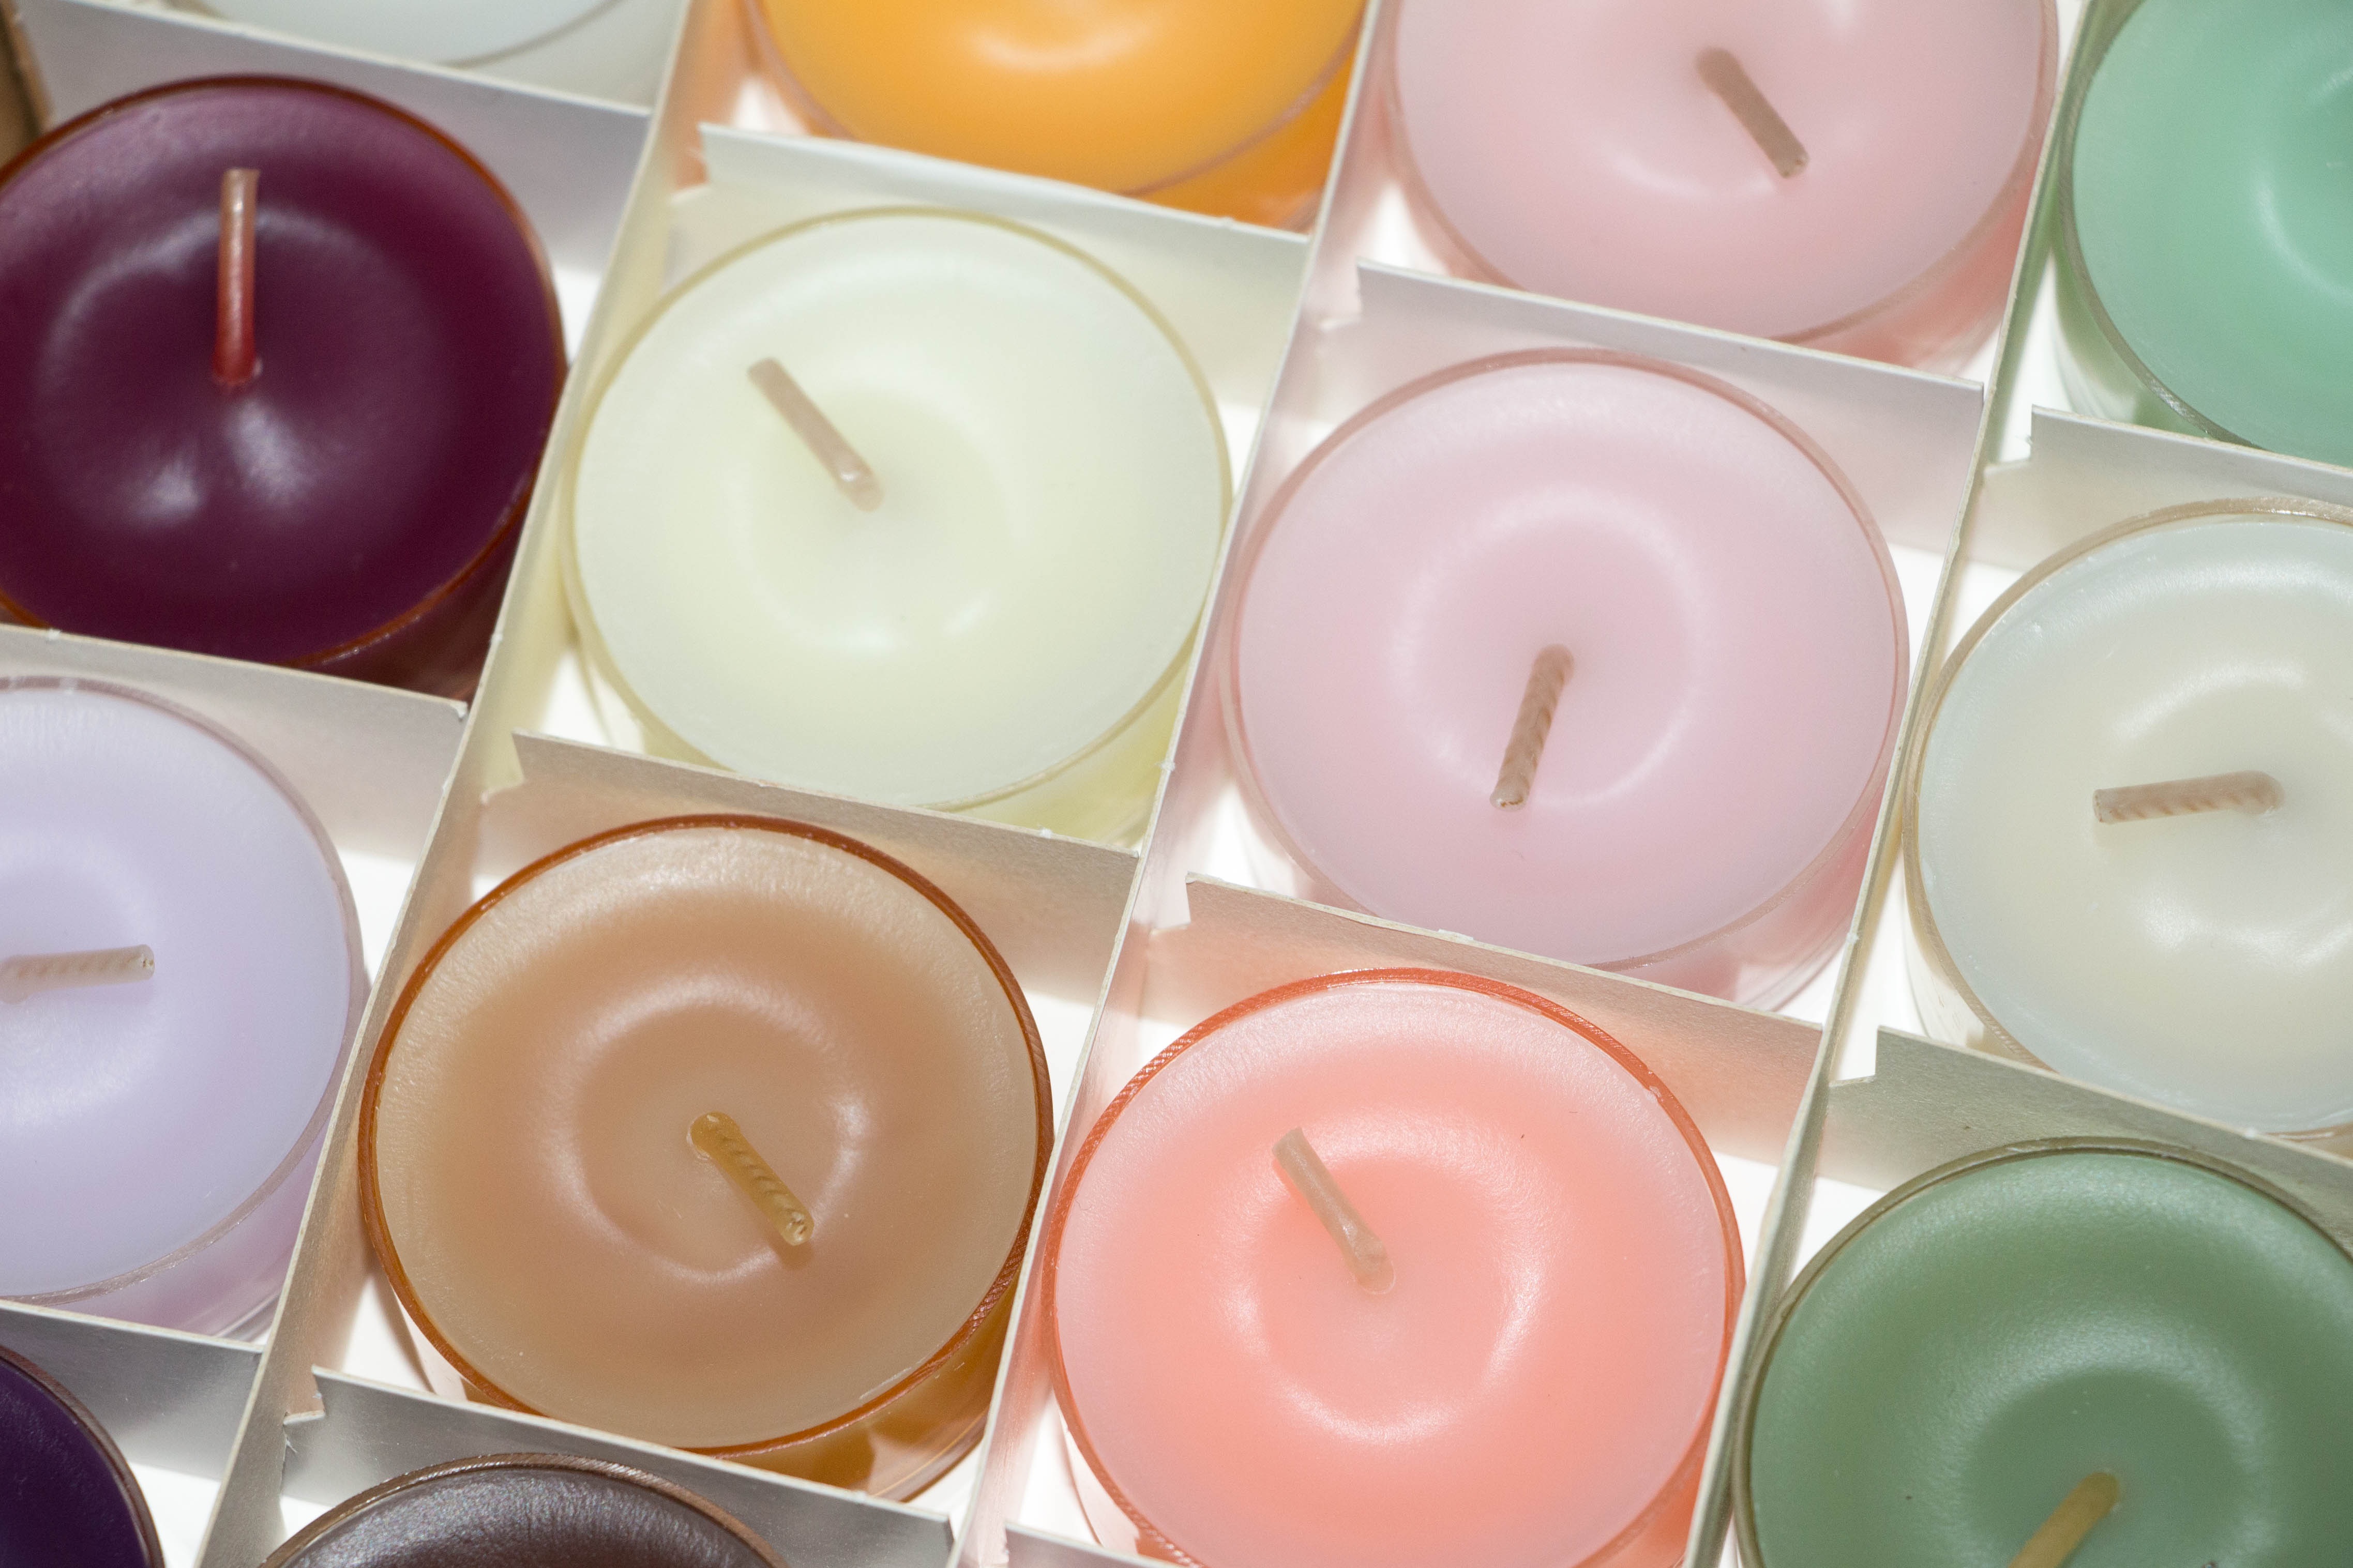 Free stock photos of candle · Pexels.